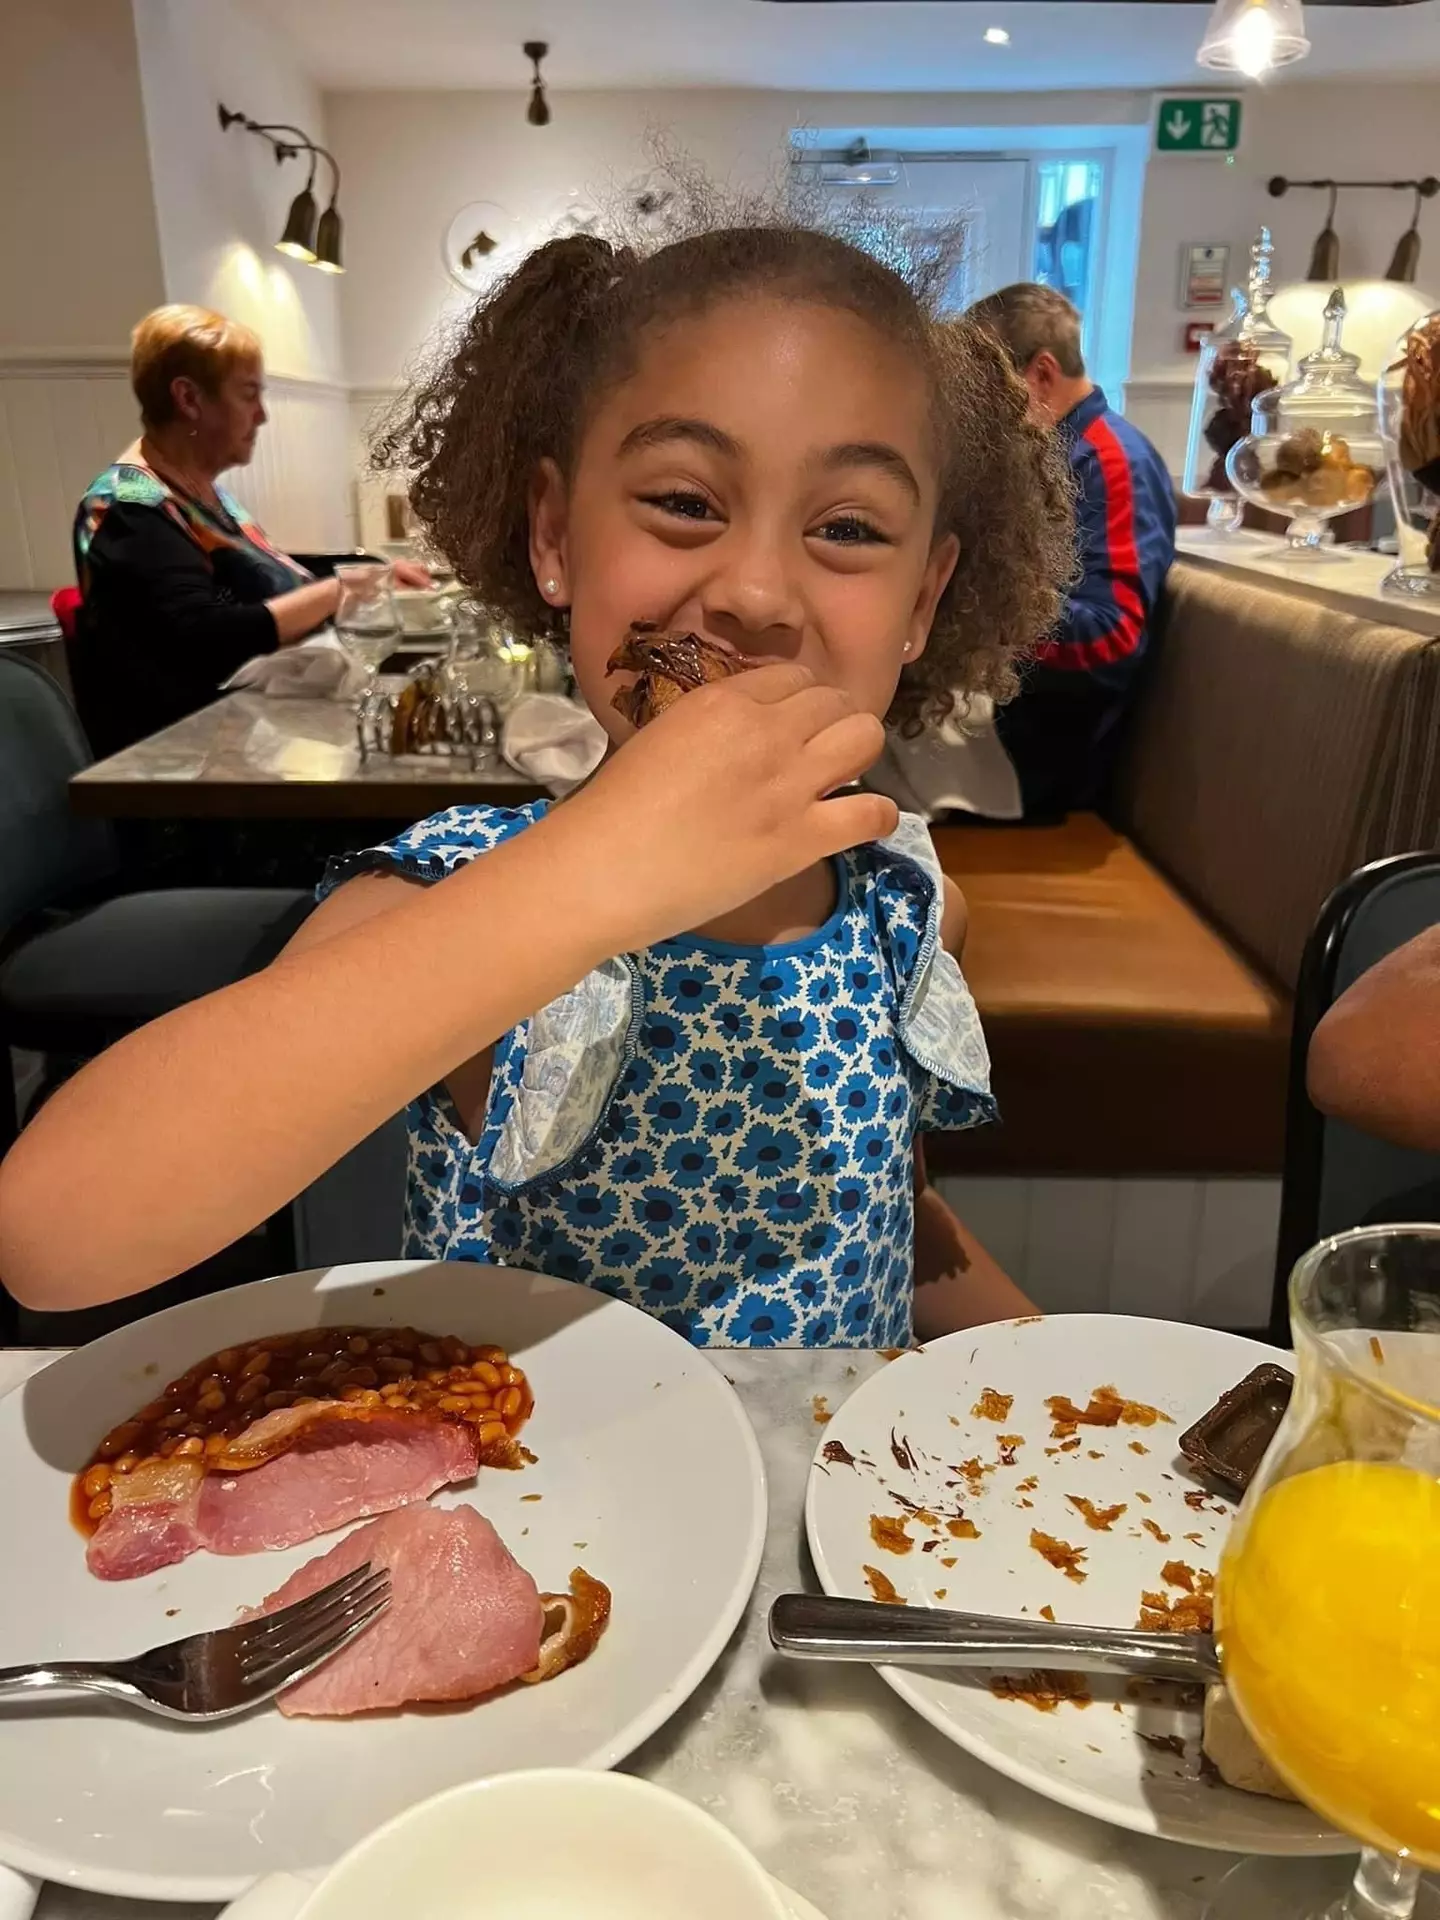 The little girl can finally eat her favourite food just in time for Easter Sunday.